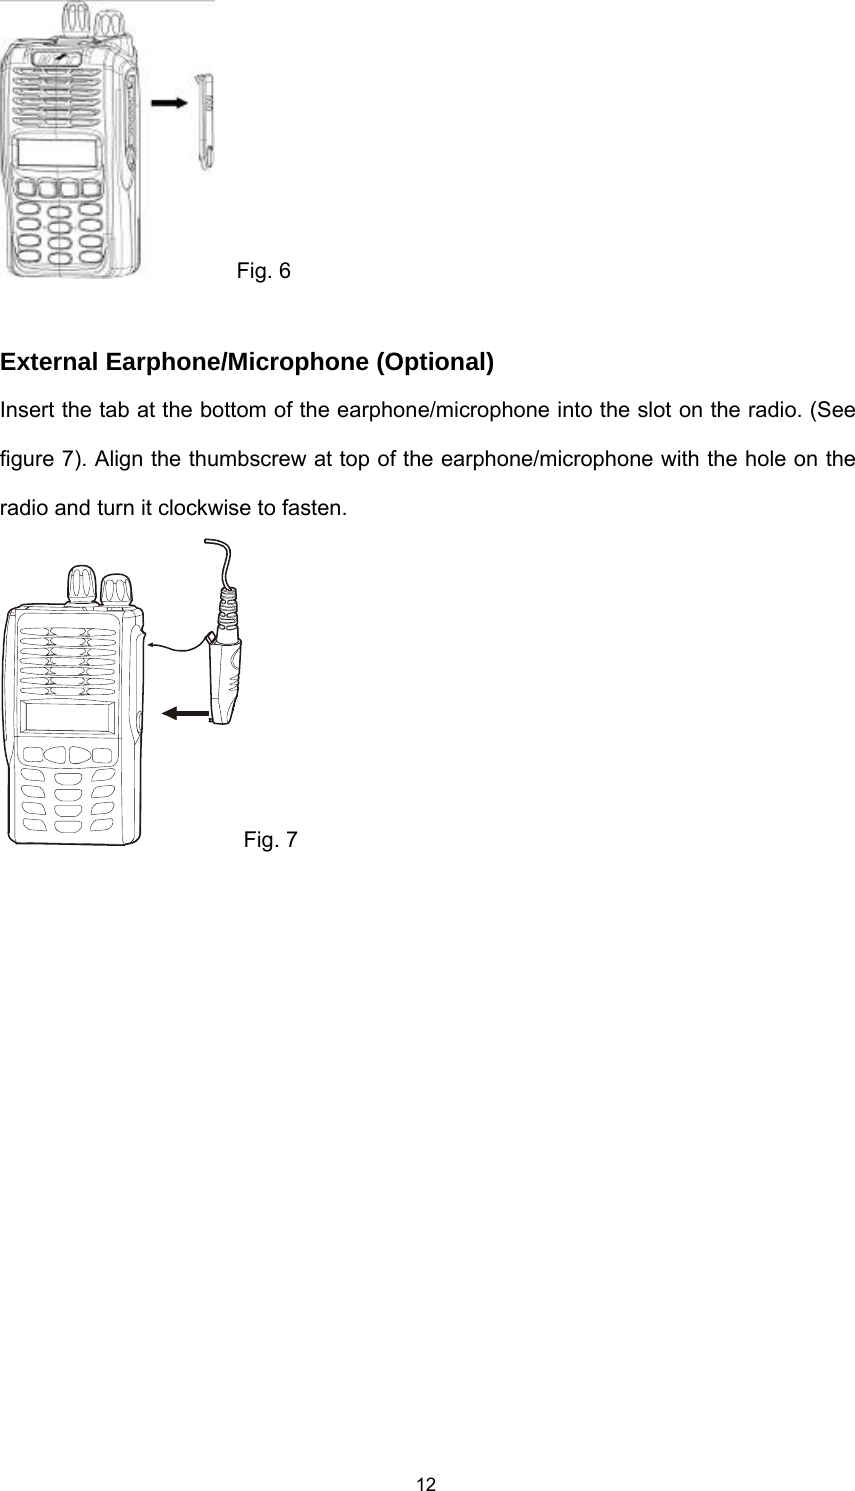  12  Fig. 6  External Earphone/Microphone (Optional) Insert the tab at the bottom of the earphone/microphone into the slot on the radio. (See figure 7). Align the thumbscrew at top of the earphone/microphone with the hole on the radio and turn it clockwise to fasten. Fig. 7  